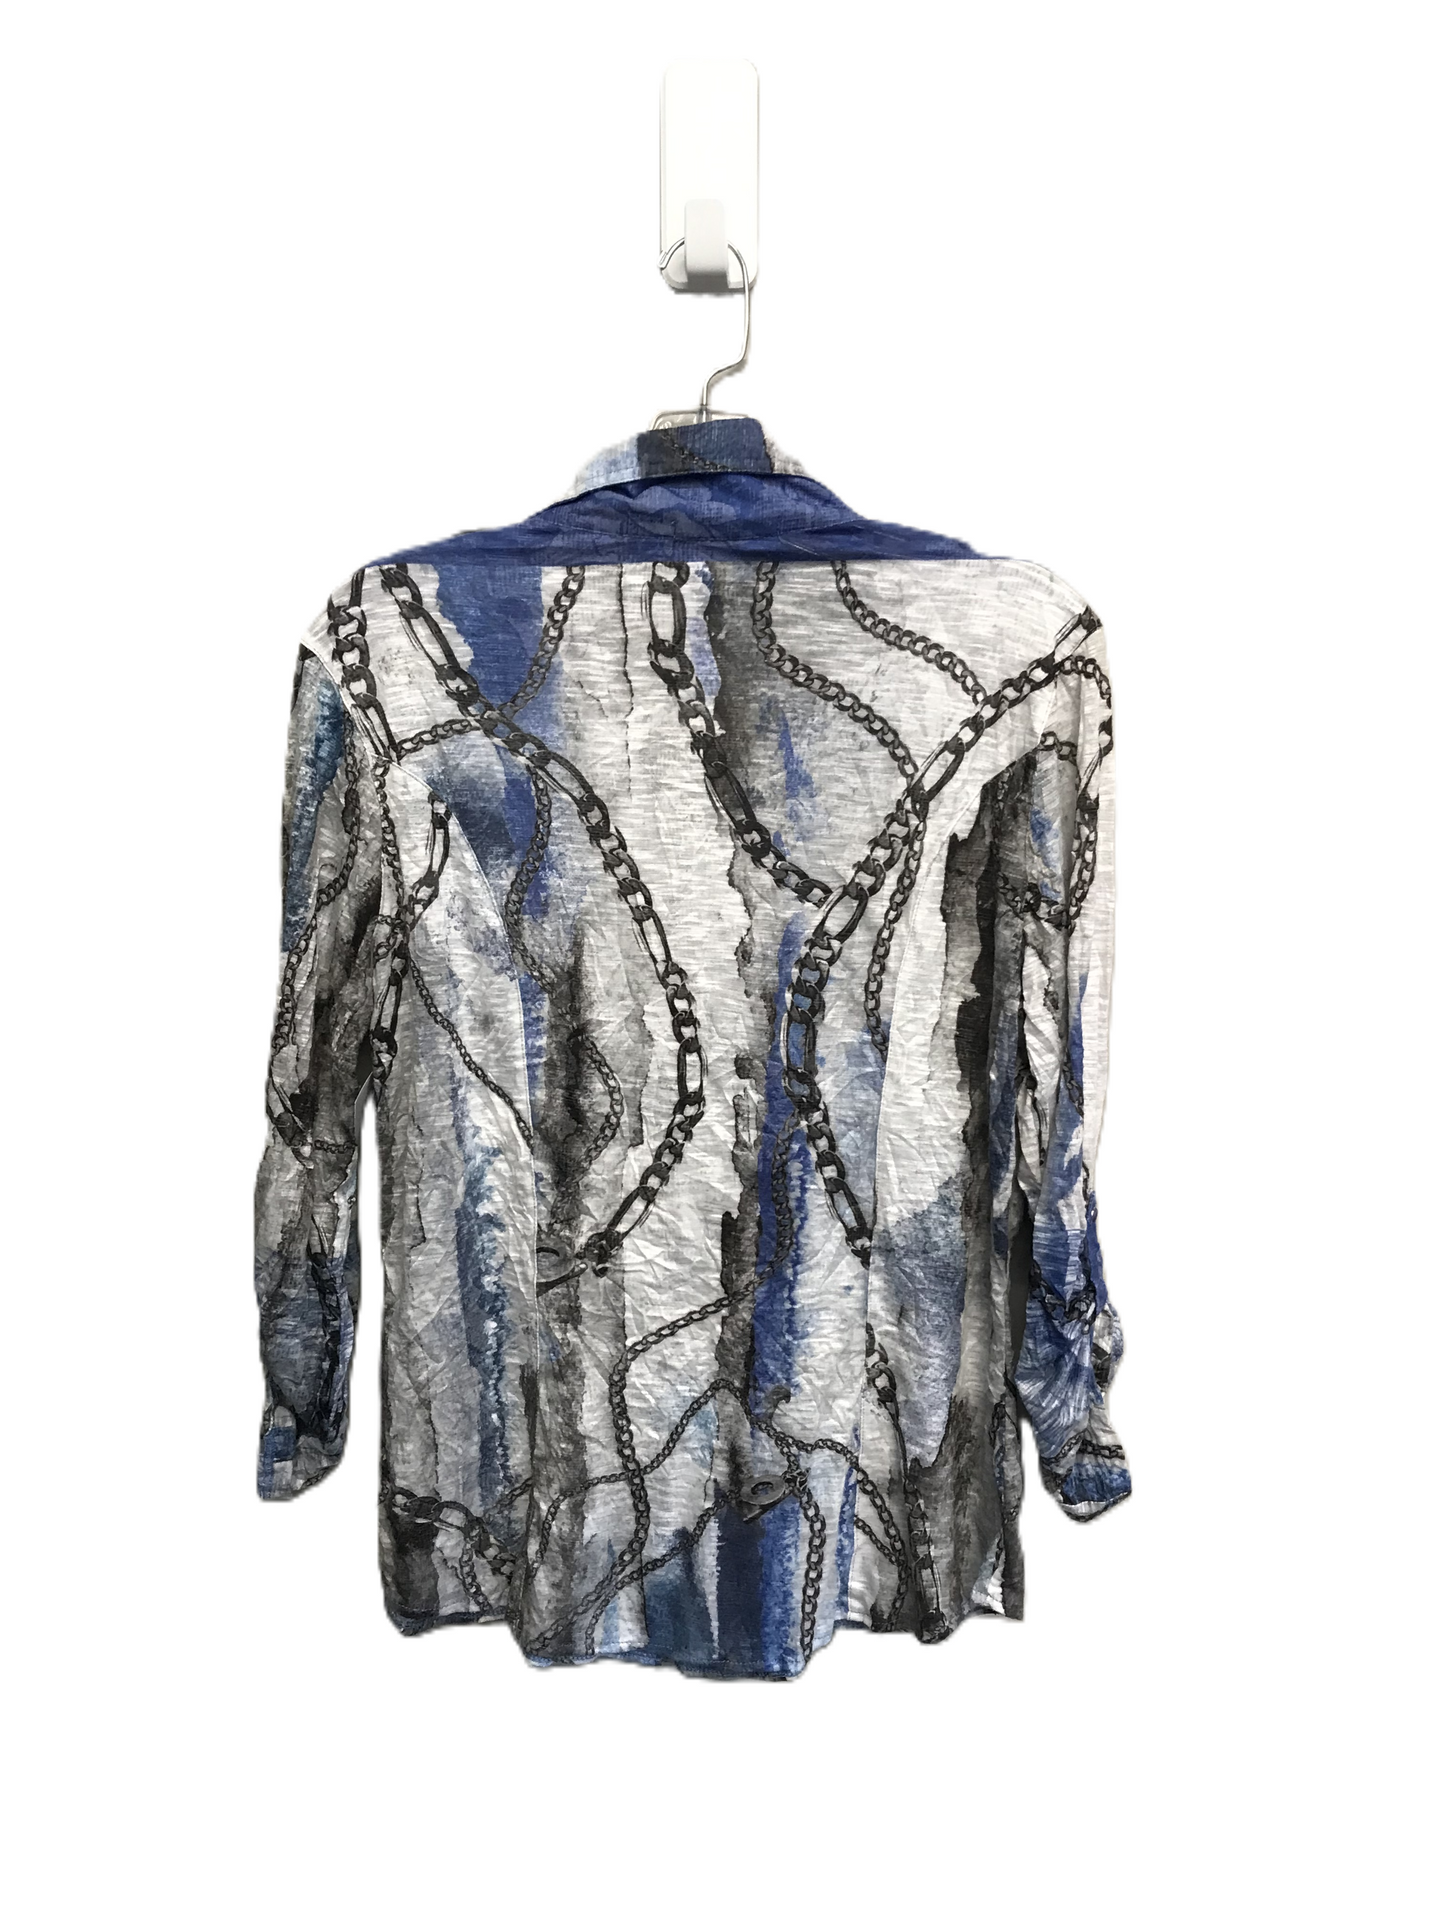 Blue & White Top Long Sleeve By David Cline, Size: M